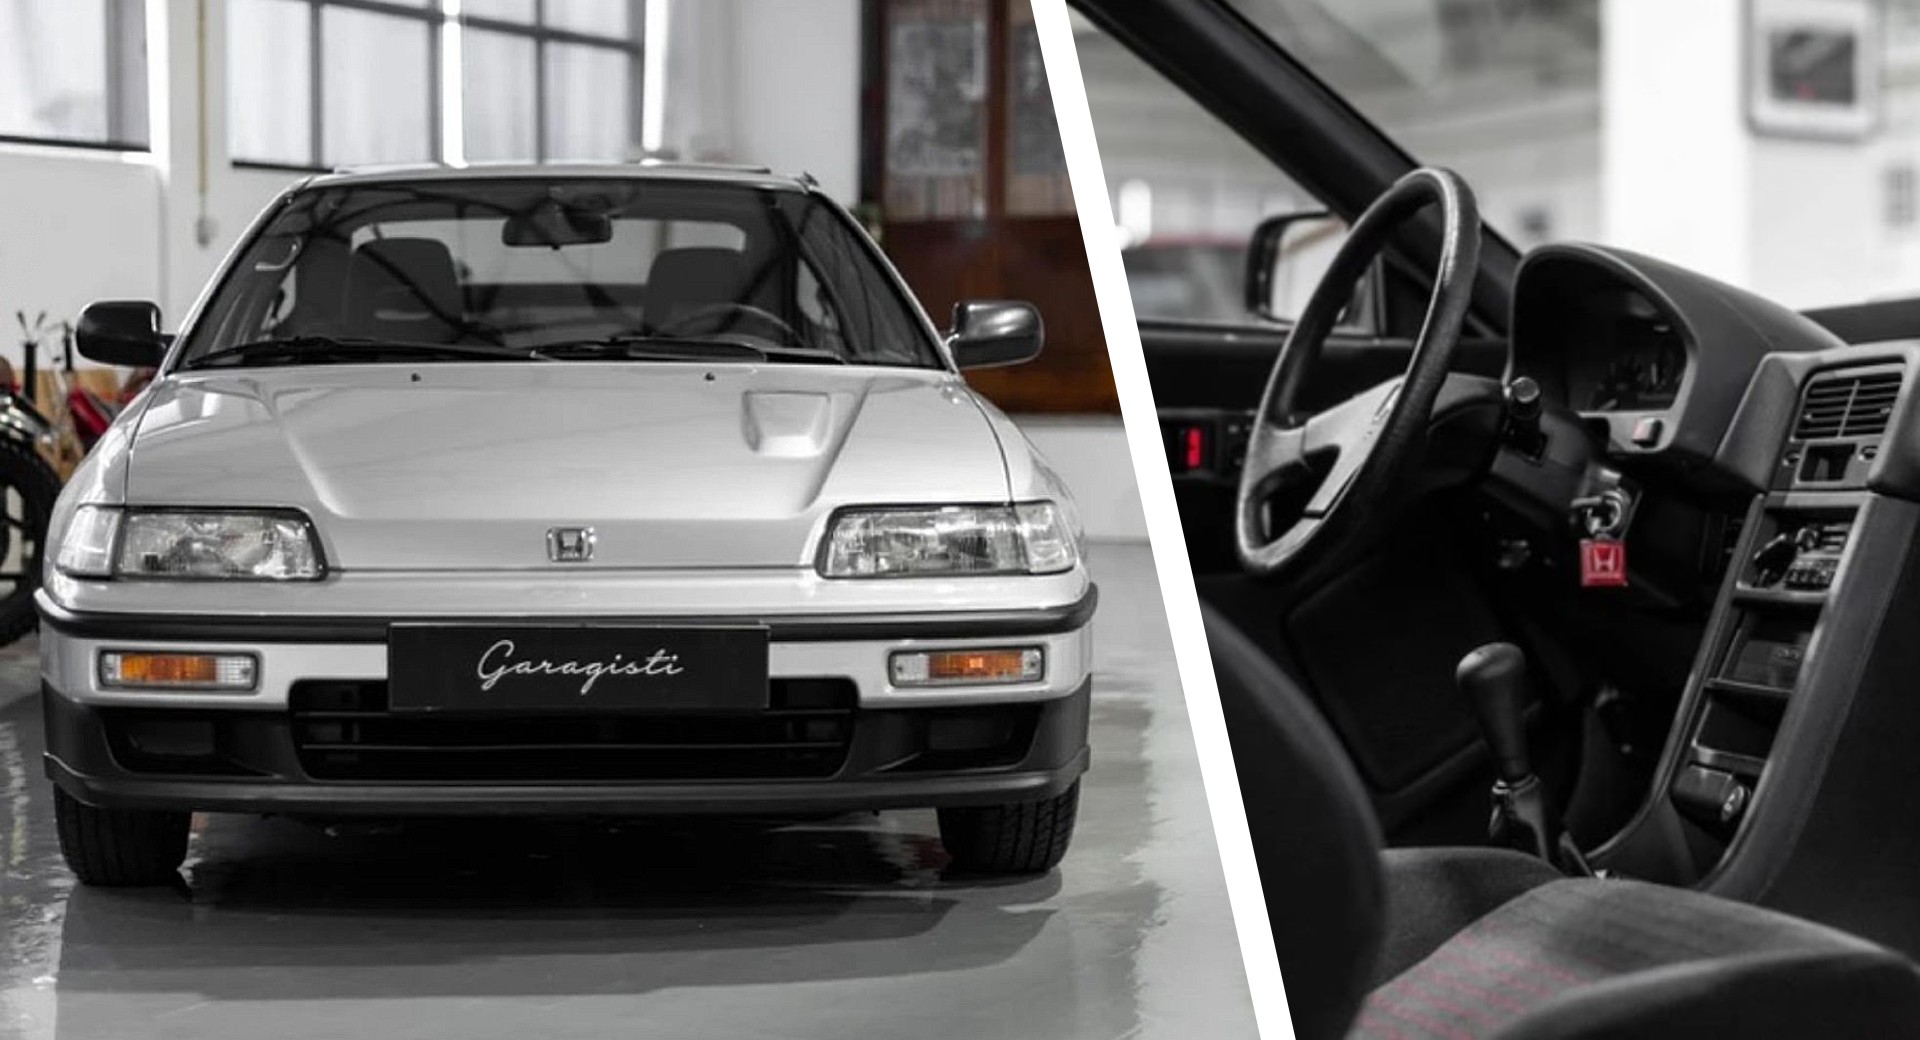 https://www.carscoops.com/wp-content/uploads/2021/10/1990-Honda-CRX-Delivery-Mileage-main.jpg